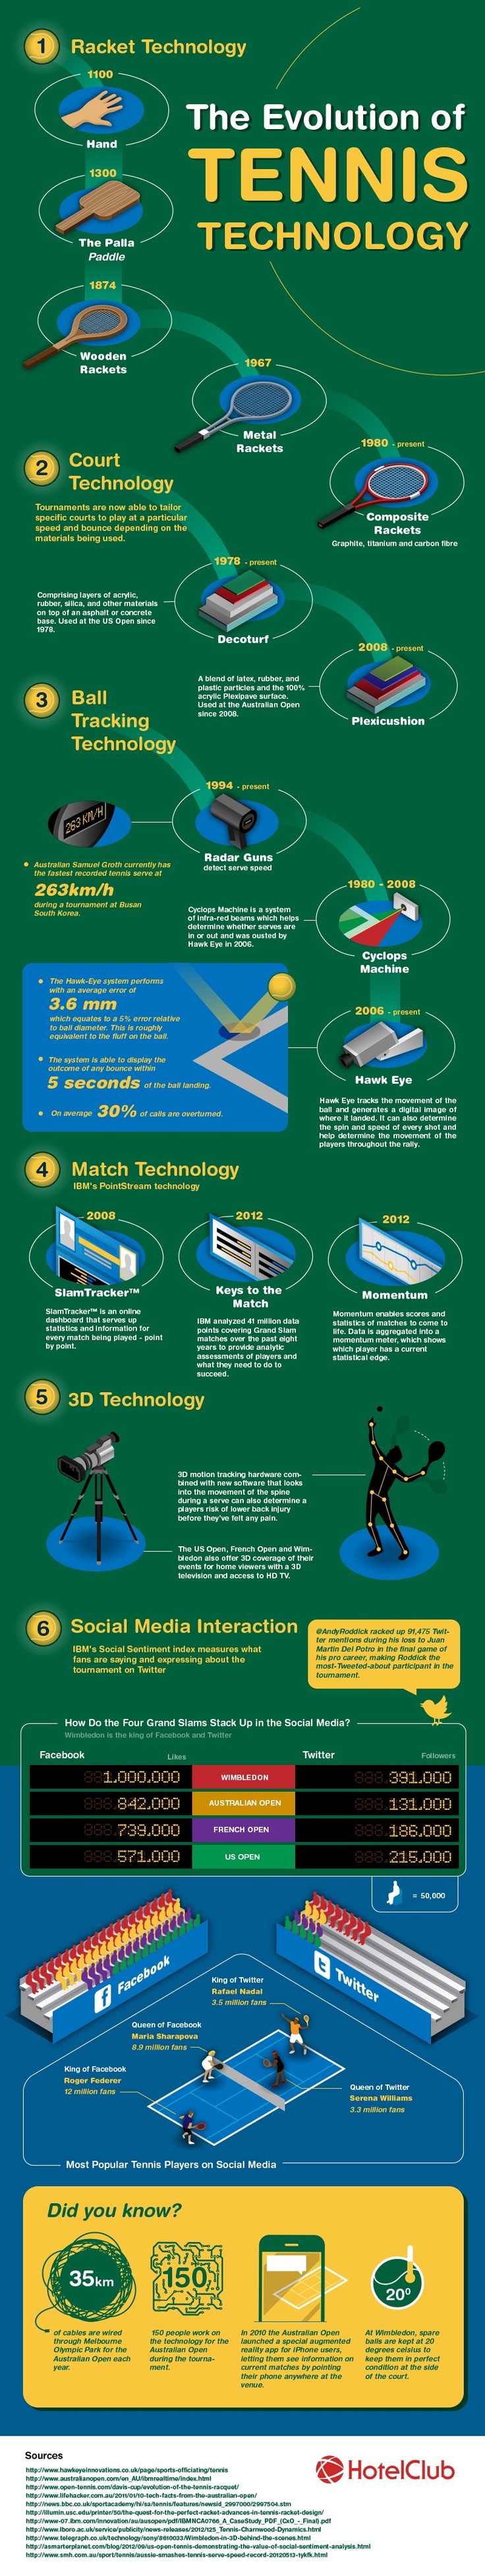 The Technology of Tennis